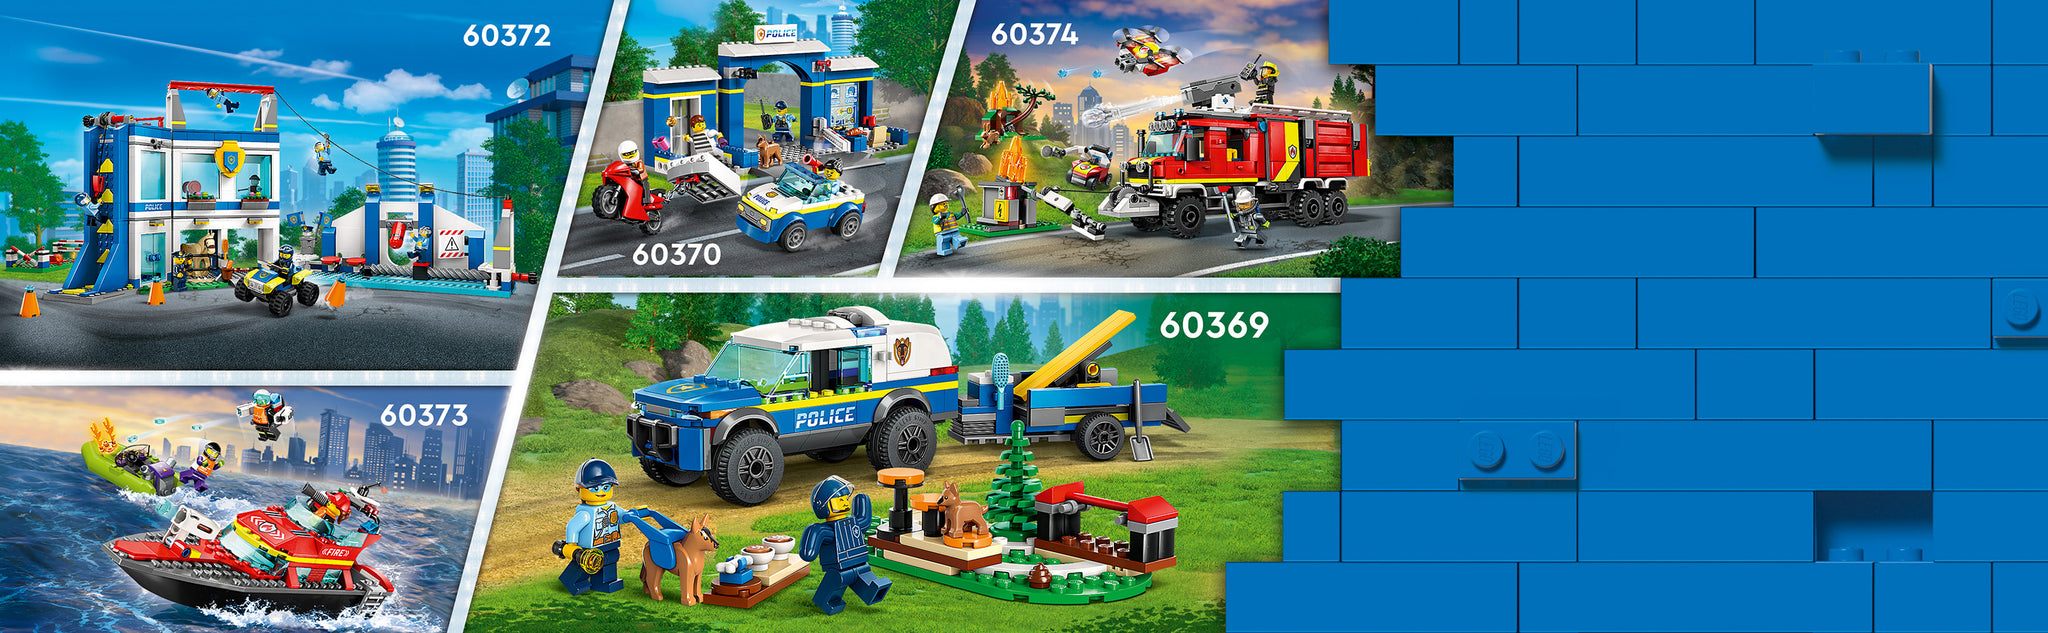 LEGO 60369 Mobile Police Dog Training Kids and dog lovers aged 5 and up will love this LEGO® City Mobile Police Dog Training (60369) playset. The set is packed with inspiration for imaginative play and includes an all-terrain vehicle, trailer and 3 dog play equipment: a see-saw, obstacle and stepping feet. Add the police officers and the figures of an adult dog and a puppy and the fun can begin. An engaging build and play experience Includes simple printed building instructions with pictures and the LEGO Builder app – a digital building companion with intuitive zoom and rotate functions that let kids see their model from all sides as they build. The creative world of LEGO City LEGO City Police playsets give kids a fun build and play experience with detailed buildings, realistic vehicles and characters that encourage imaginative role play.